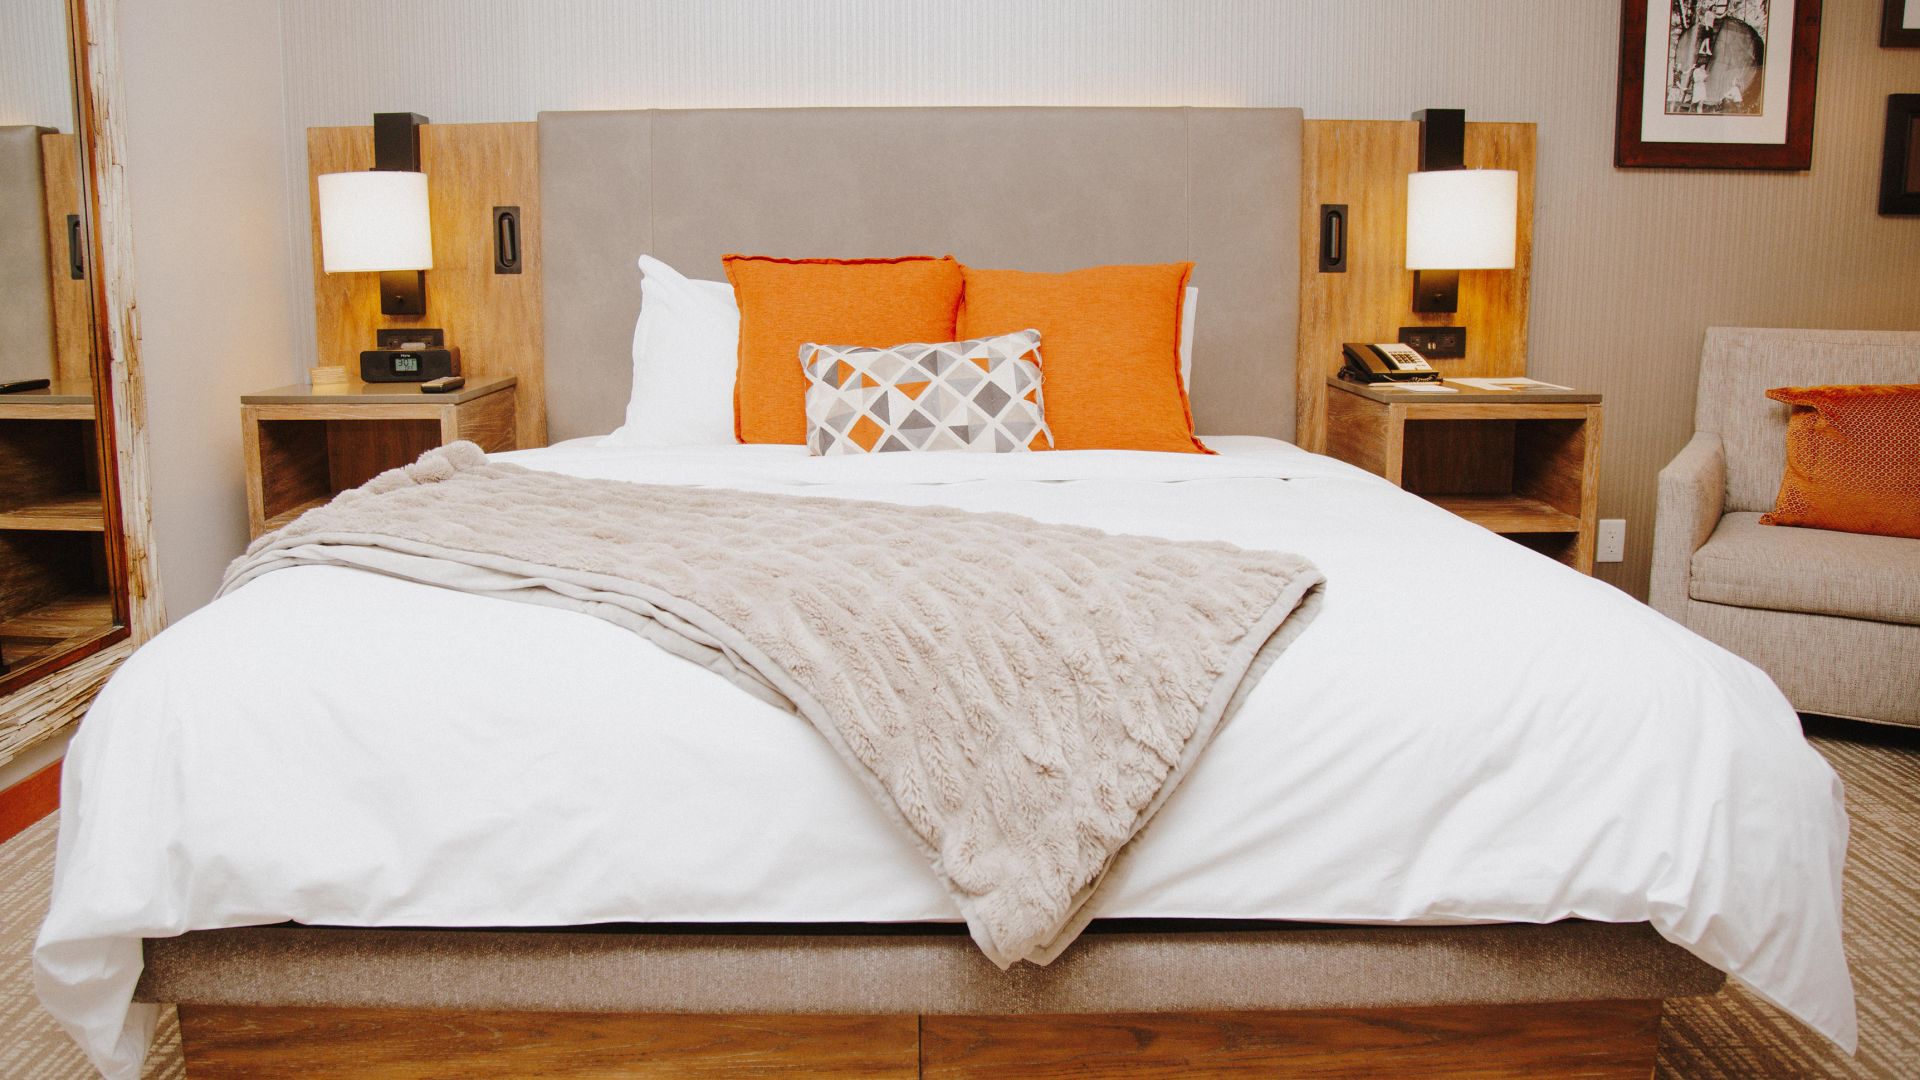 A Bed With Orange And White Sheets